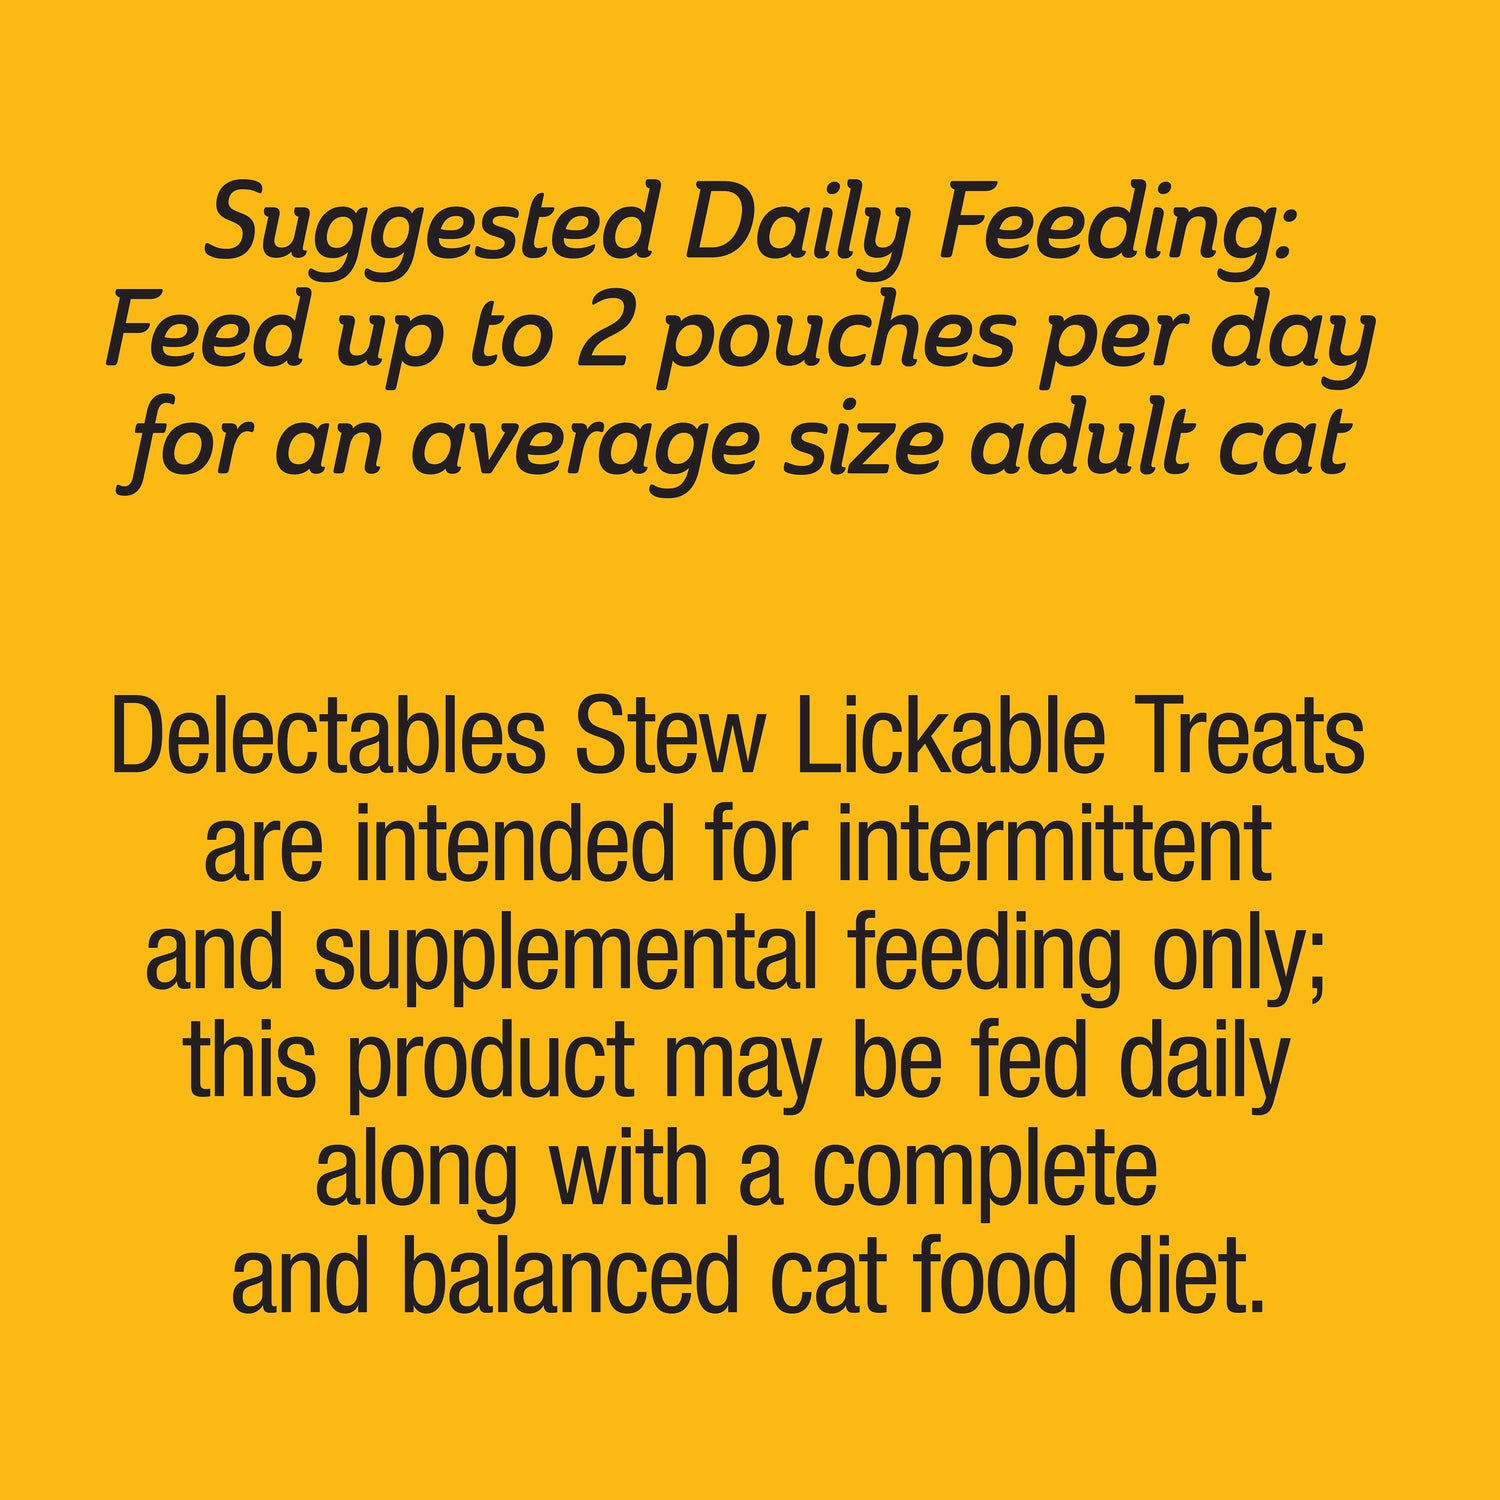 Delectables Stew Senior 10+ Lickable Cat Treats Variety Pack, 12 Pack